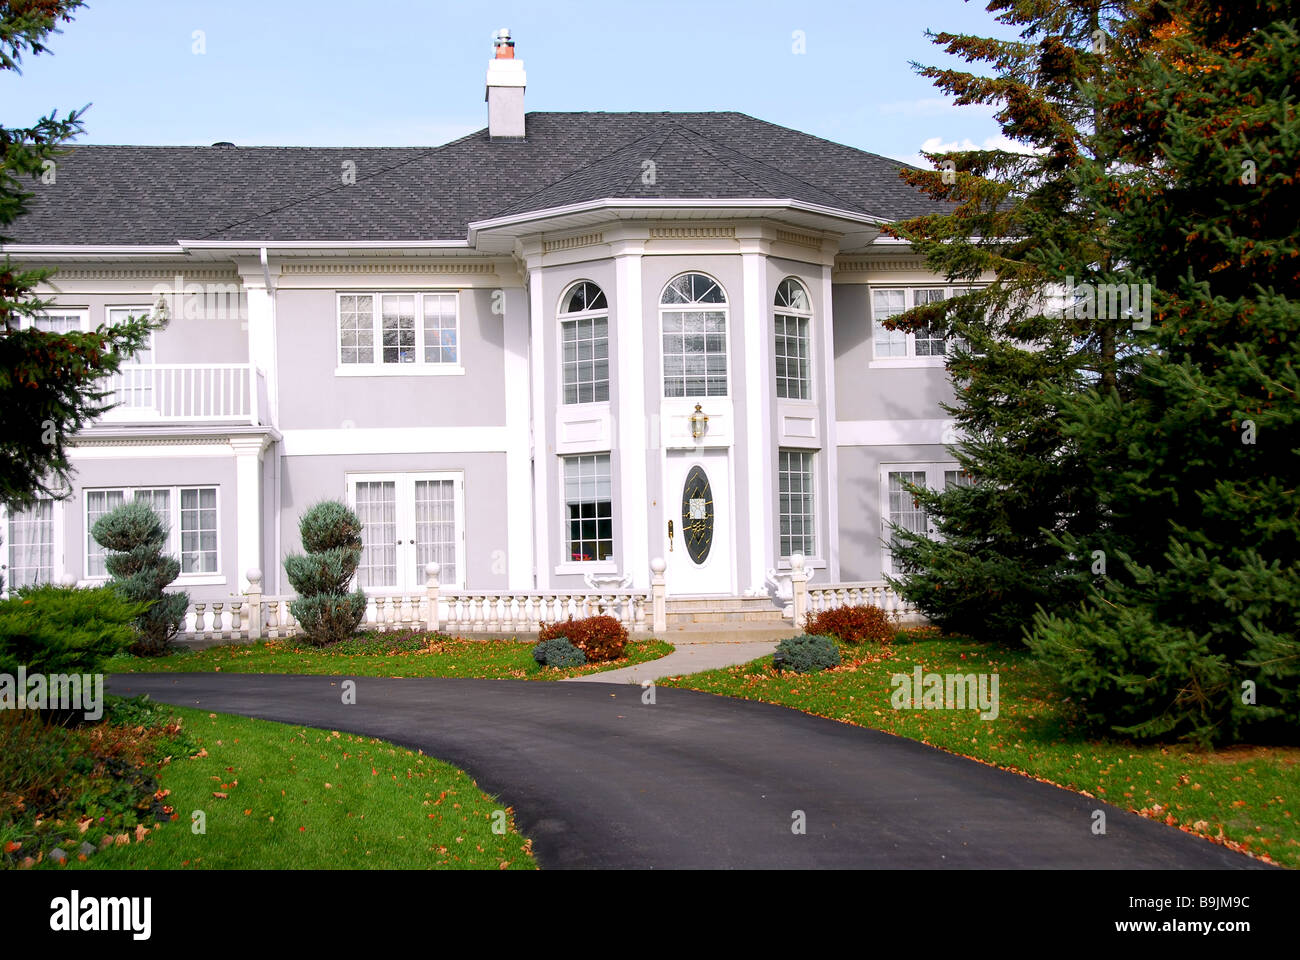 Beautiful mansion in grey and white color Stock Photo